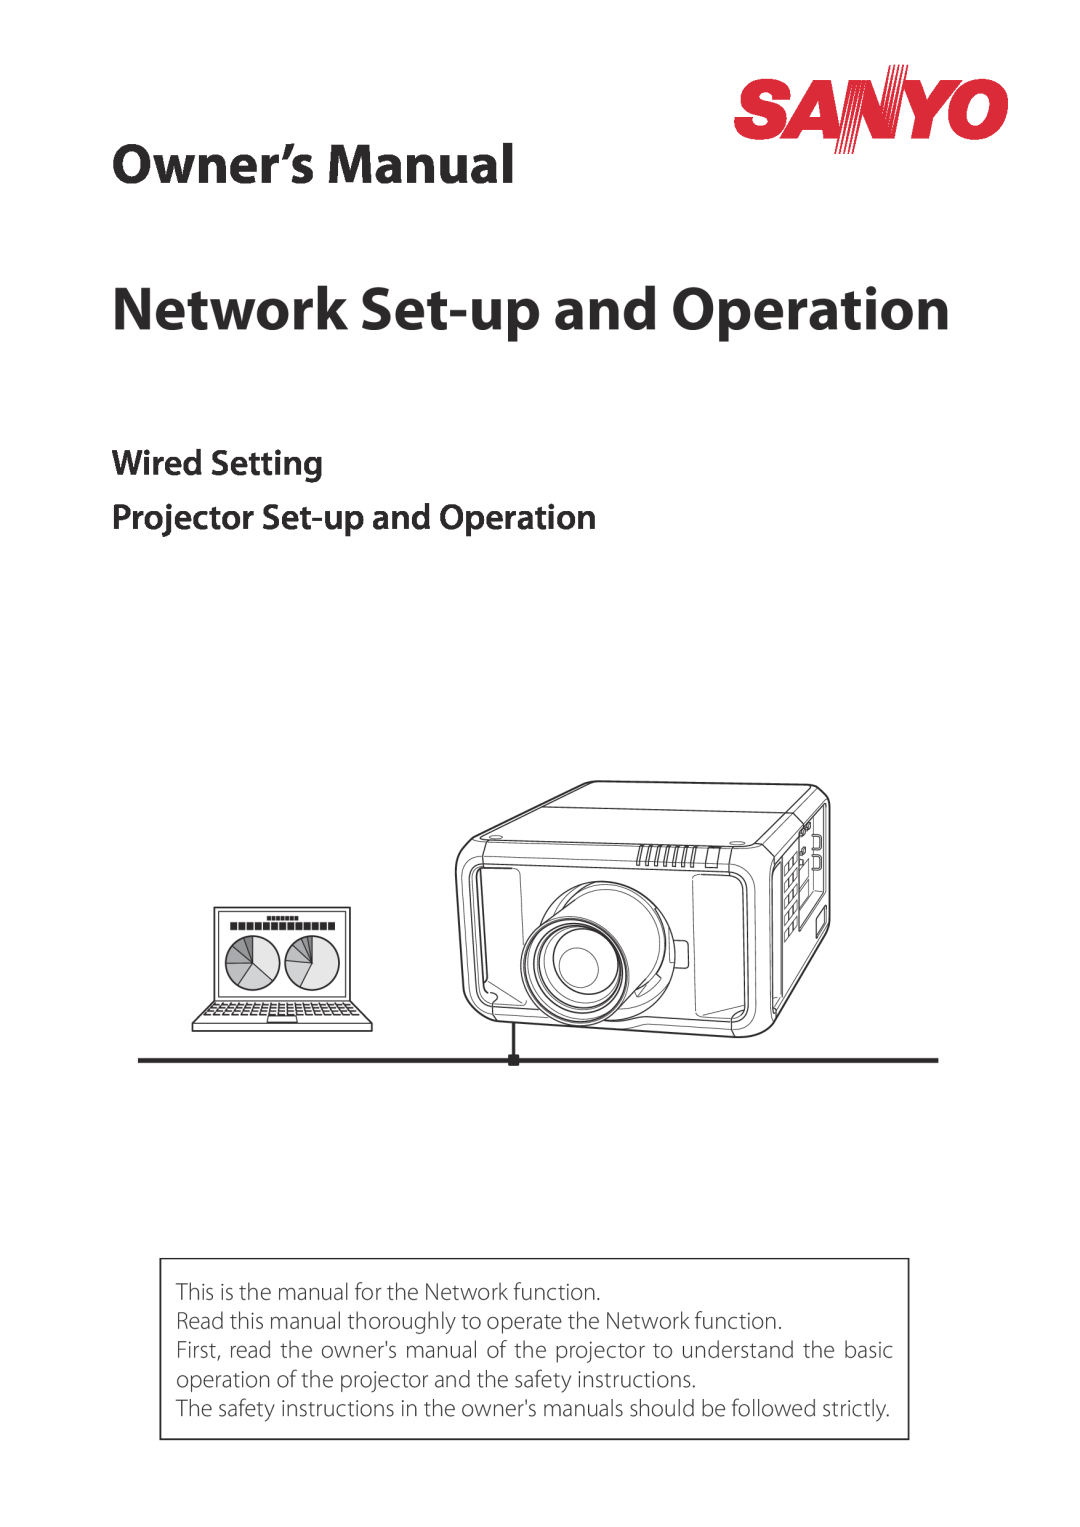 Sanyo Proj05 owner manual Wired Setting Projector Set-up and Operation, Network Set-up and Operation, Owner’s Manual 